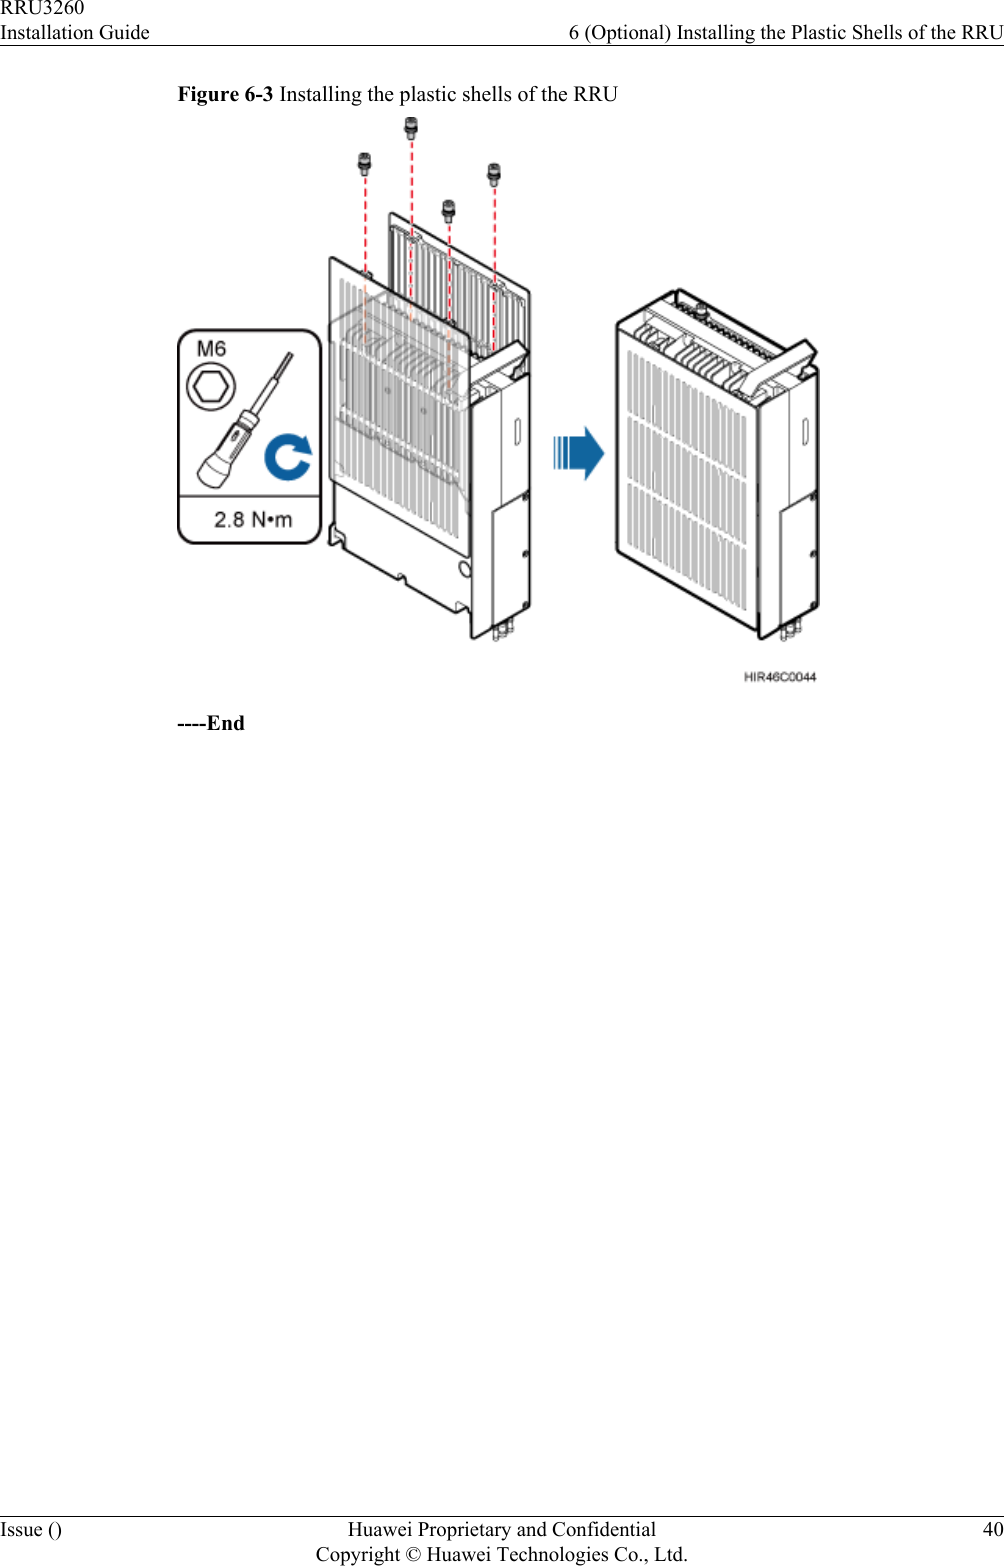 Figure 6-3 Installing the plastic shells of the RRU----EndRRU3260Installation Guide 6 (Optional) Installing the Plastic Shells of the RRUIssue () Huawei Proprietary and ConfidentialCopyright © Huawei Technologies Co., Ltd.40